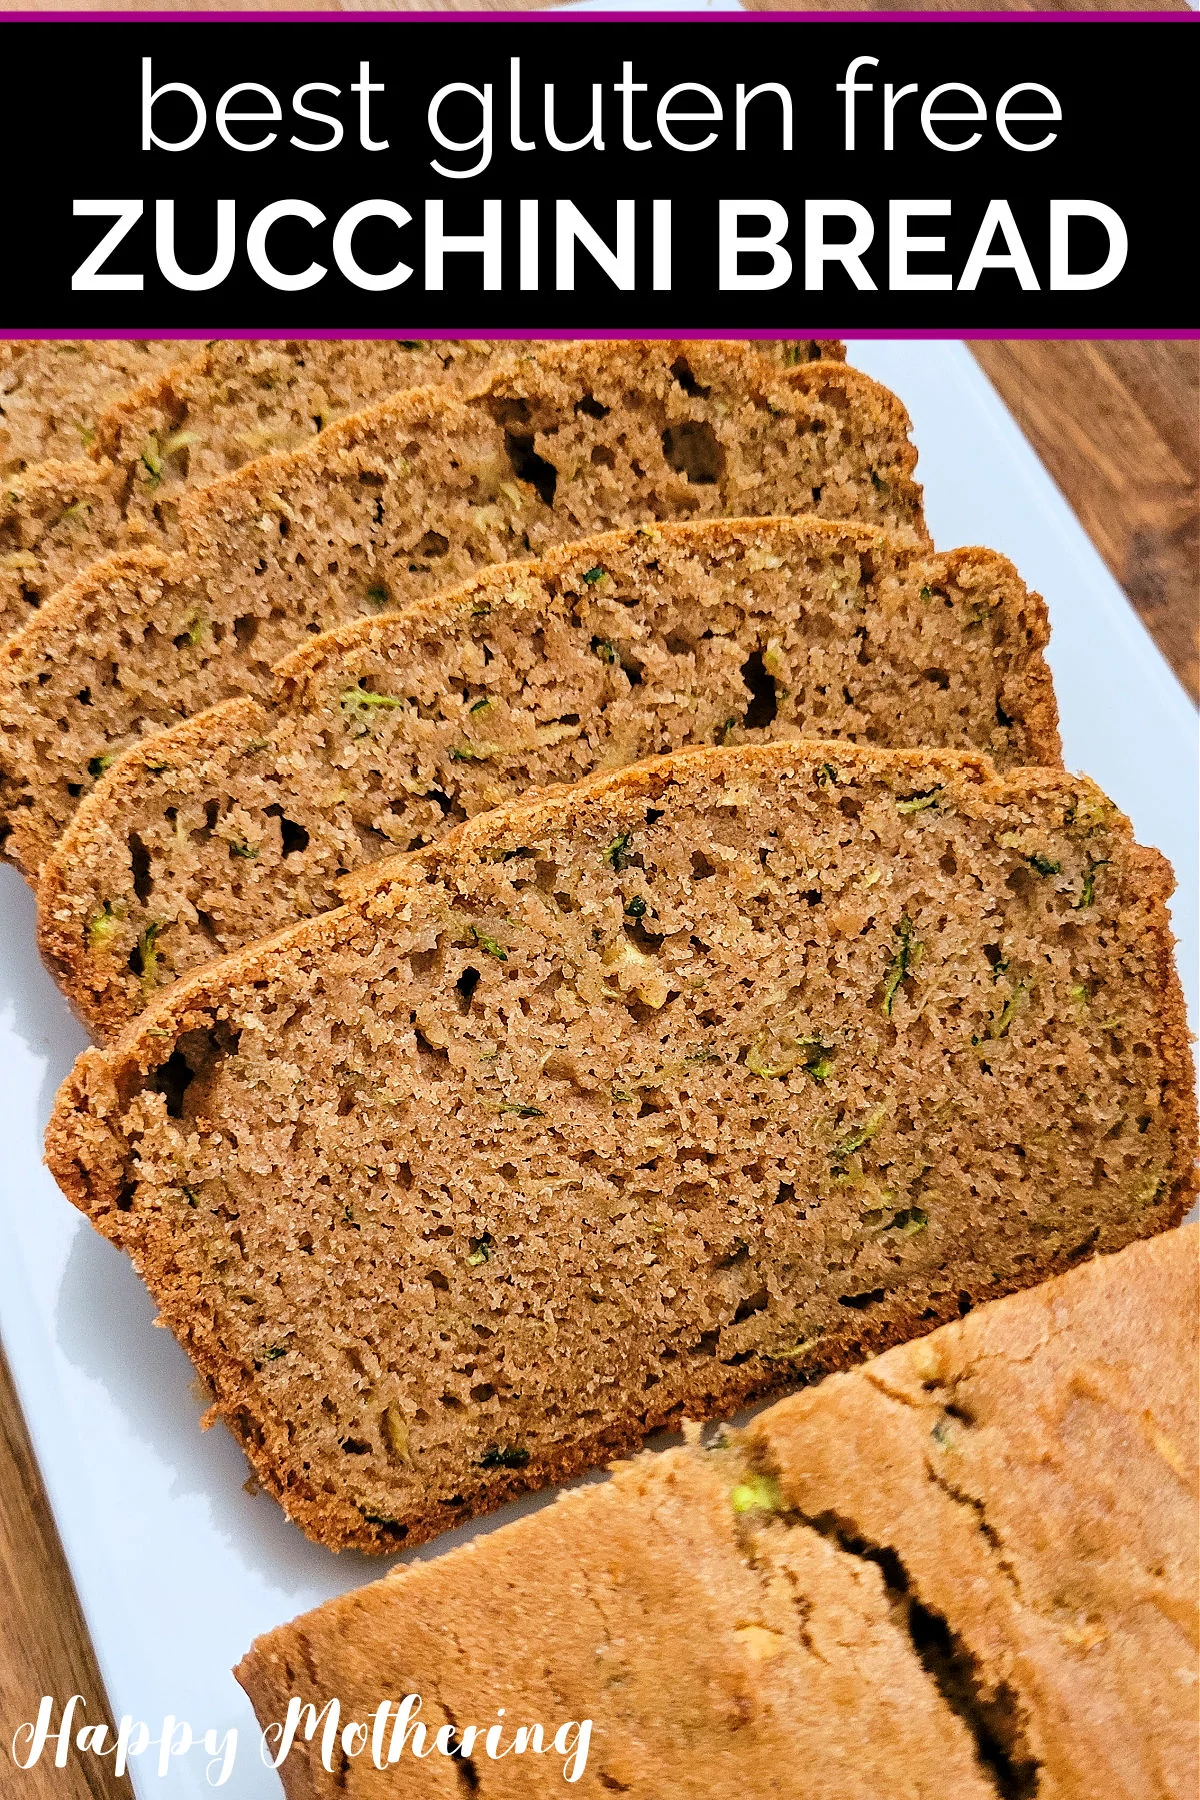 Loaf of gluten free zucchini bread sliced and laid out on a white rectangular serving platter.